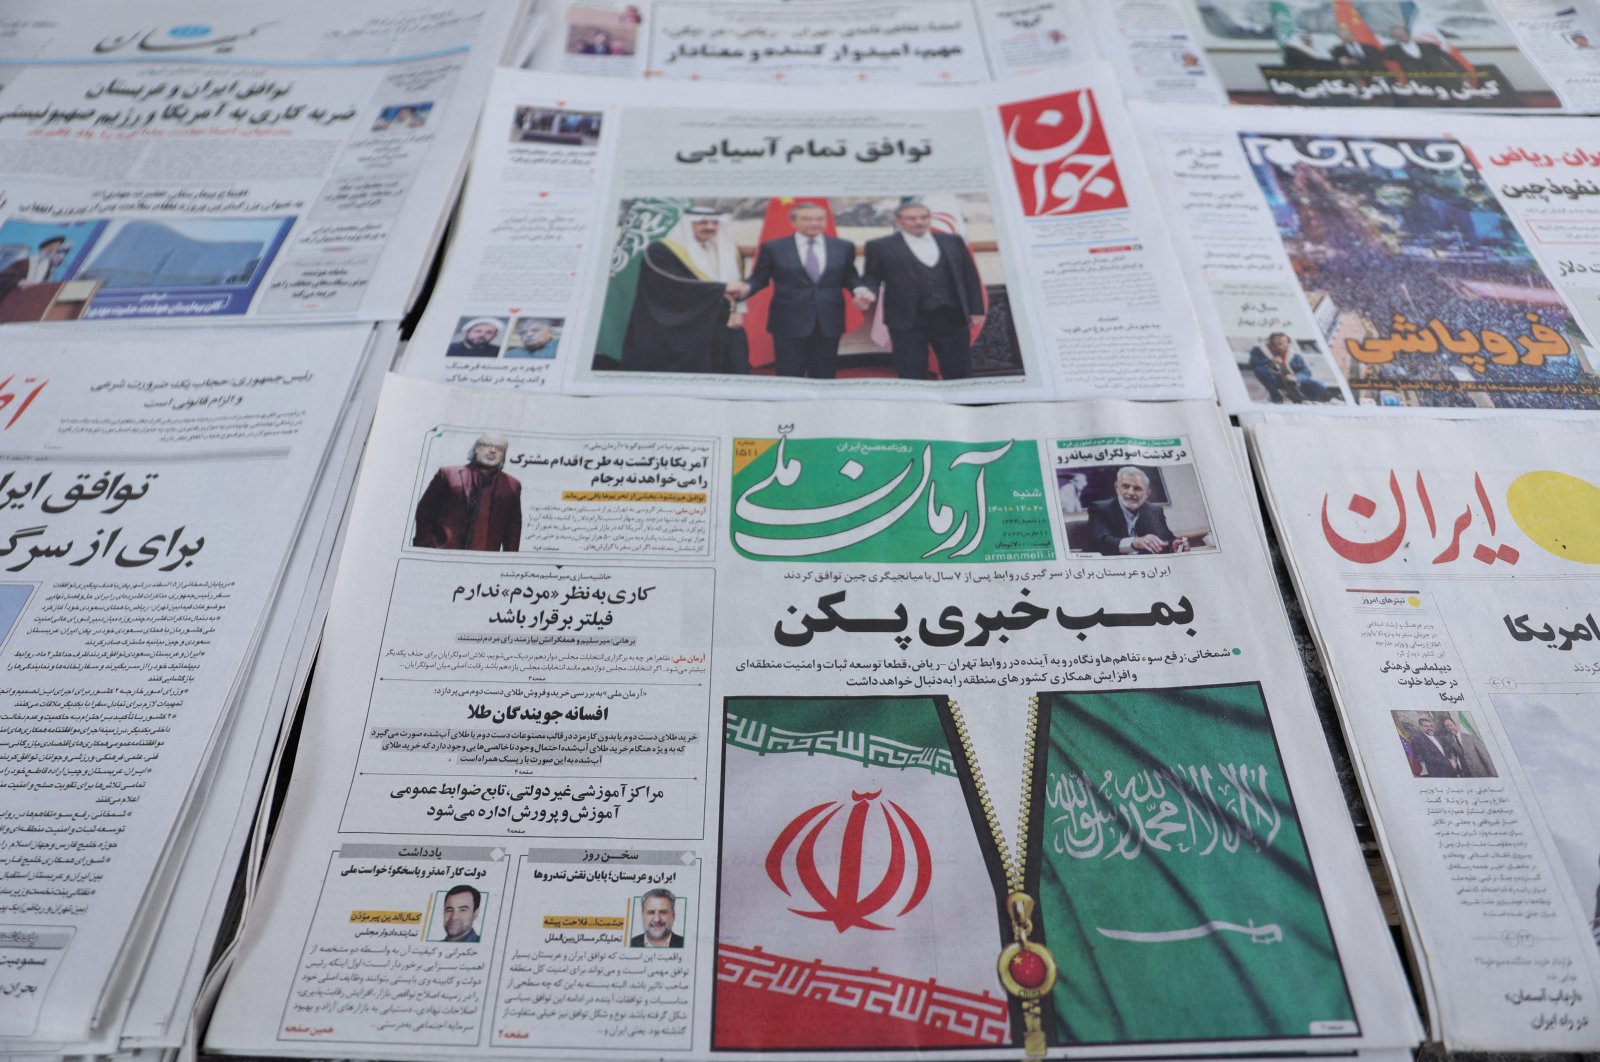 A newspaper with a cover picture of the flag of Iran and Saudi Arabia is seen in Tehran, Iran, March 11, 2023. (Reuters Photo)